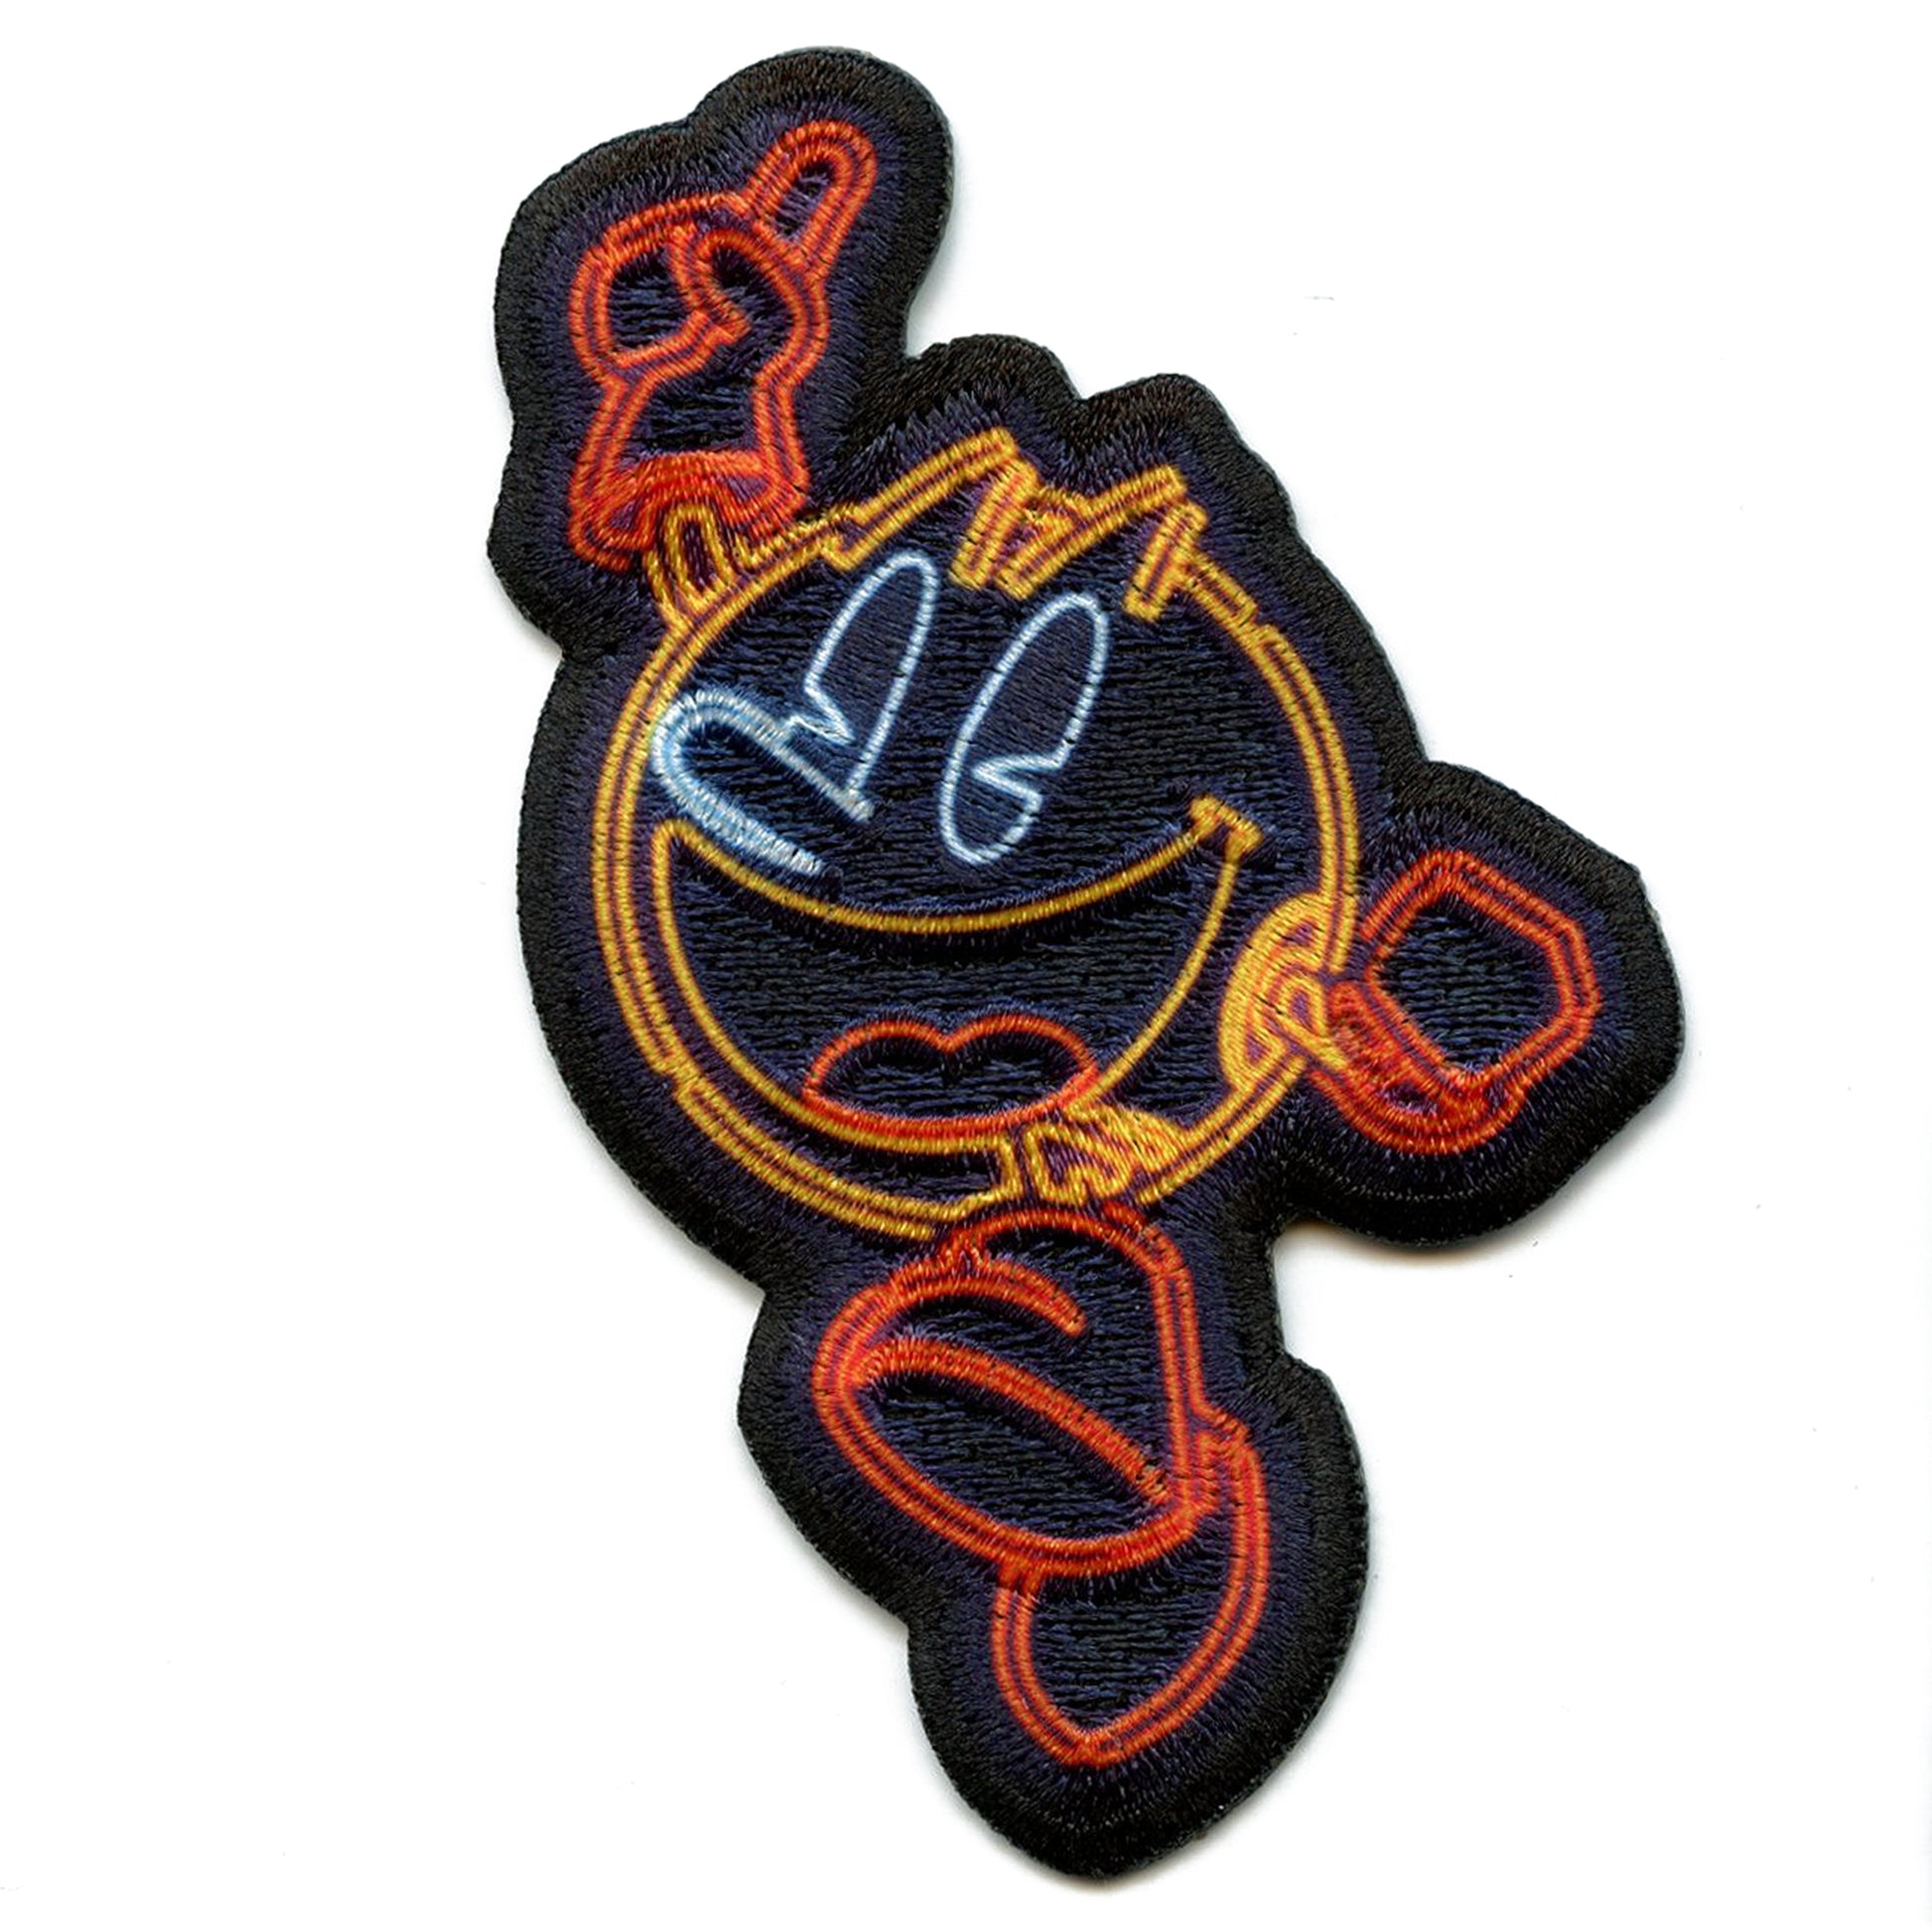 PAC-MAN Neon Jumping Logo Patch Retro Arcade Gaming Embroidered Iron 